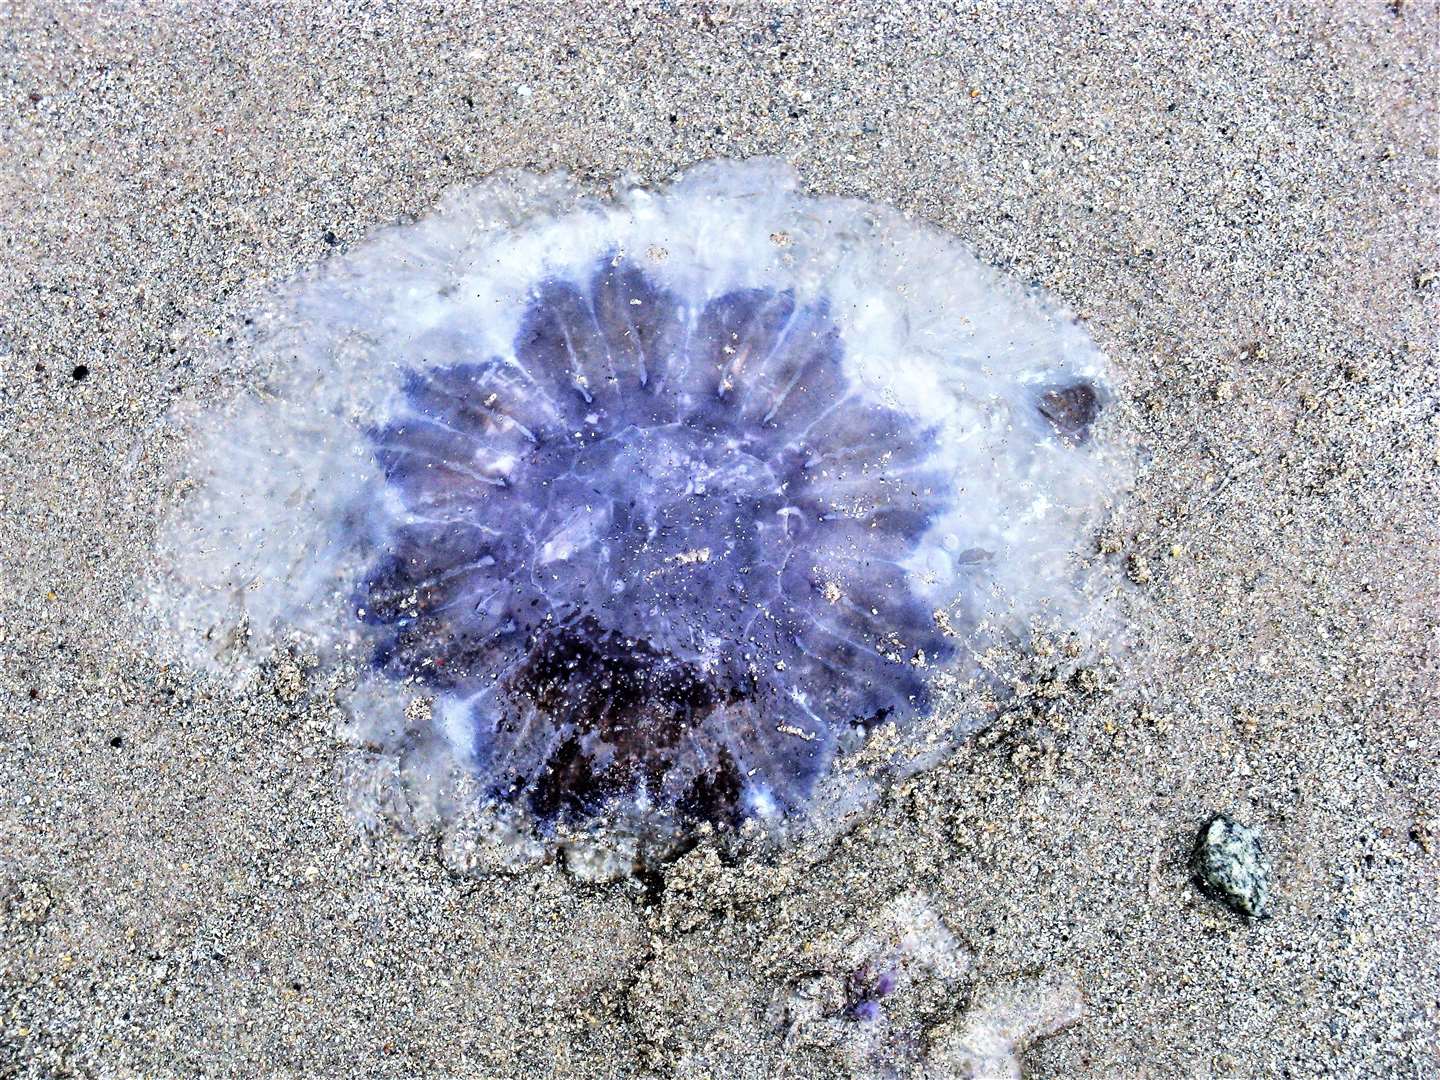 The blue jellyfish can also give a nasty sting.